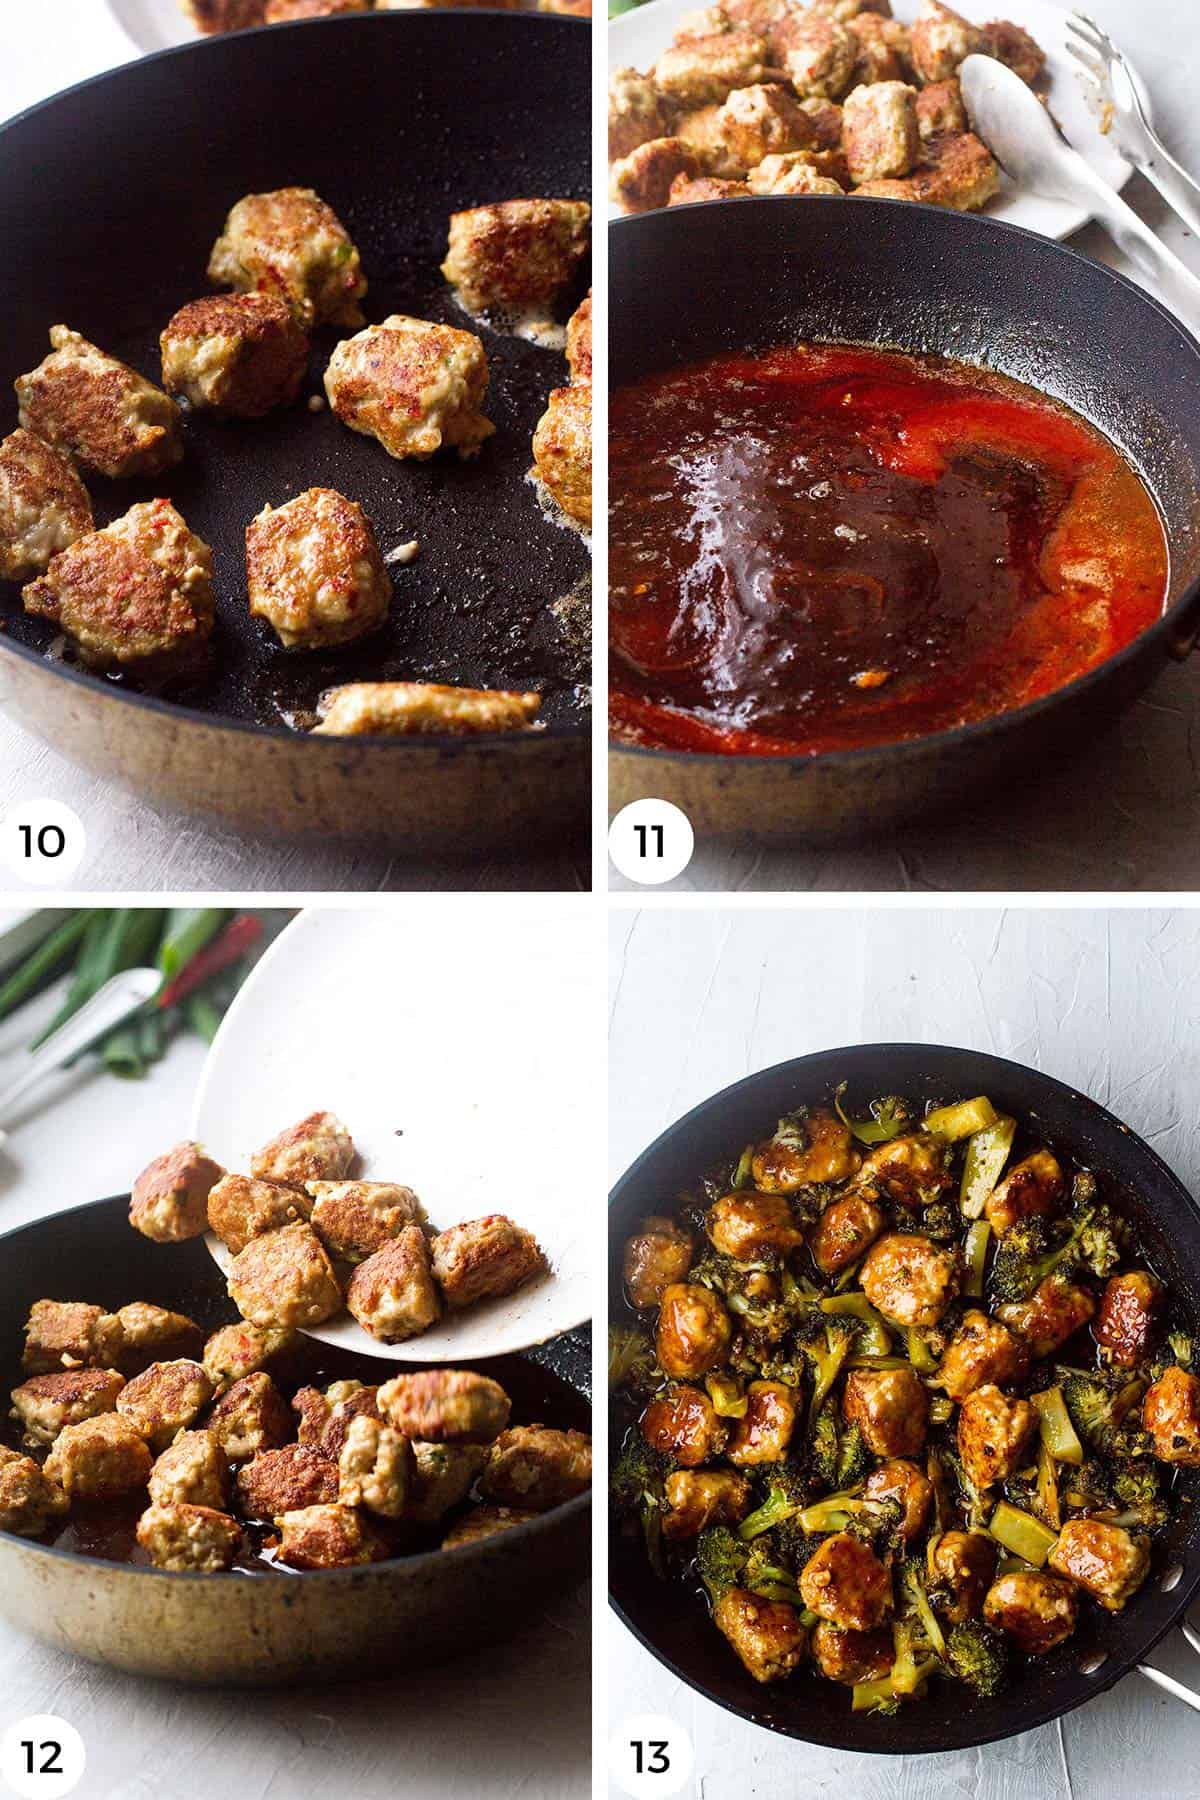 How to cook the meatballs and sauce.